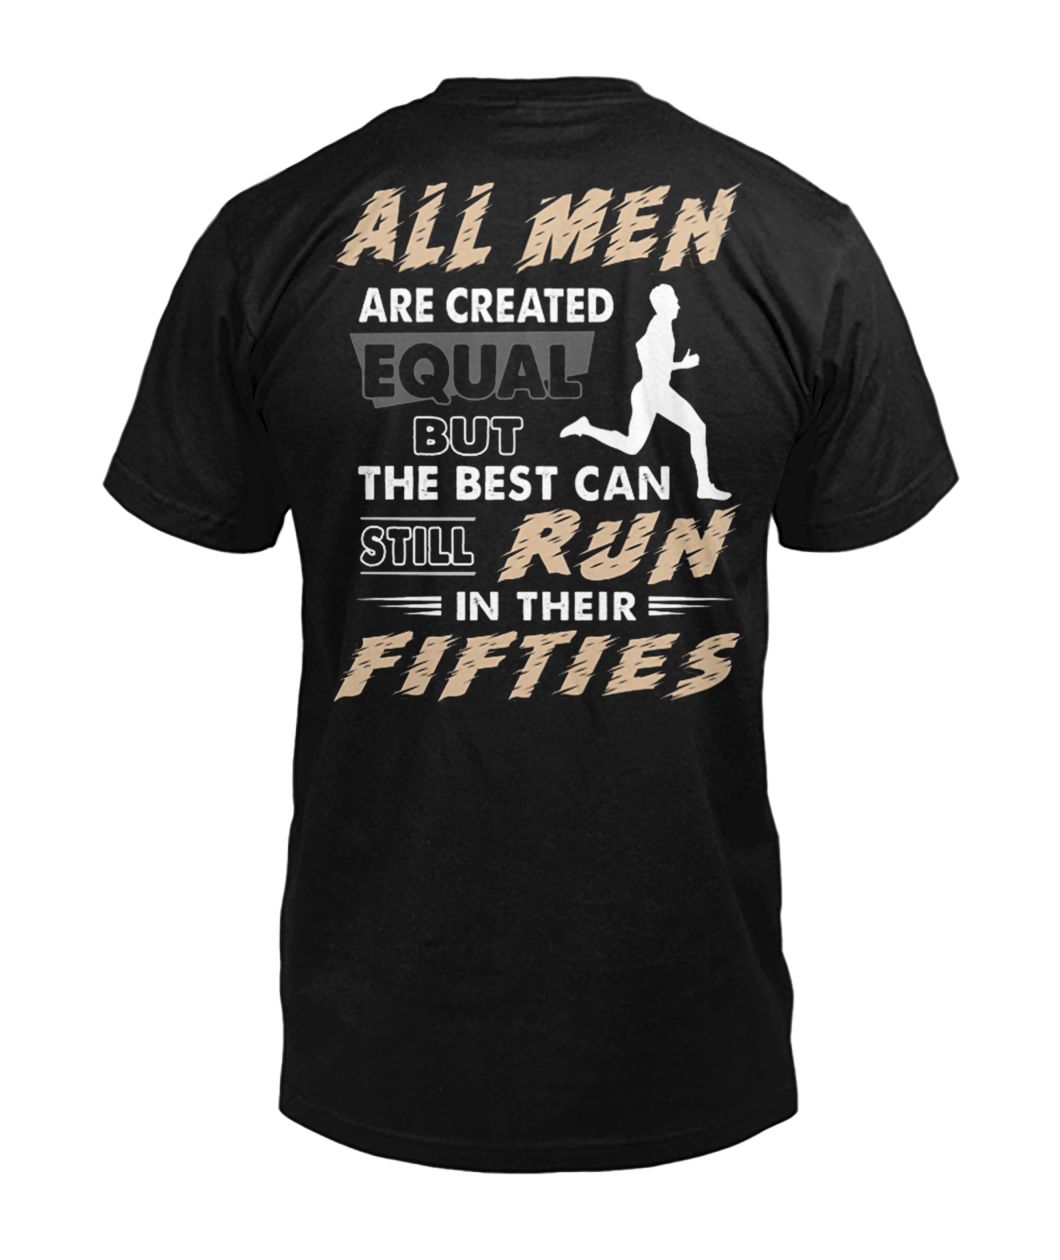 All men are created equal but the best can still run in their fifties mens v-neck